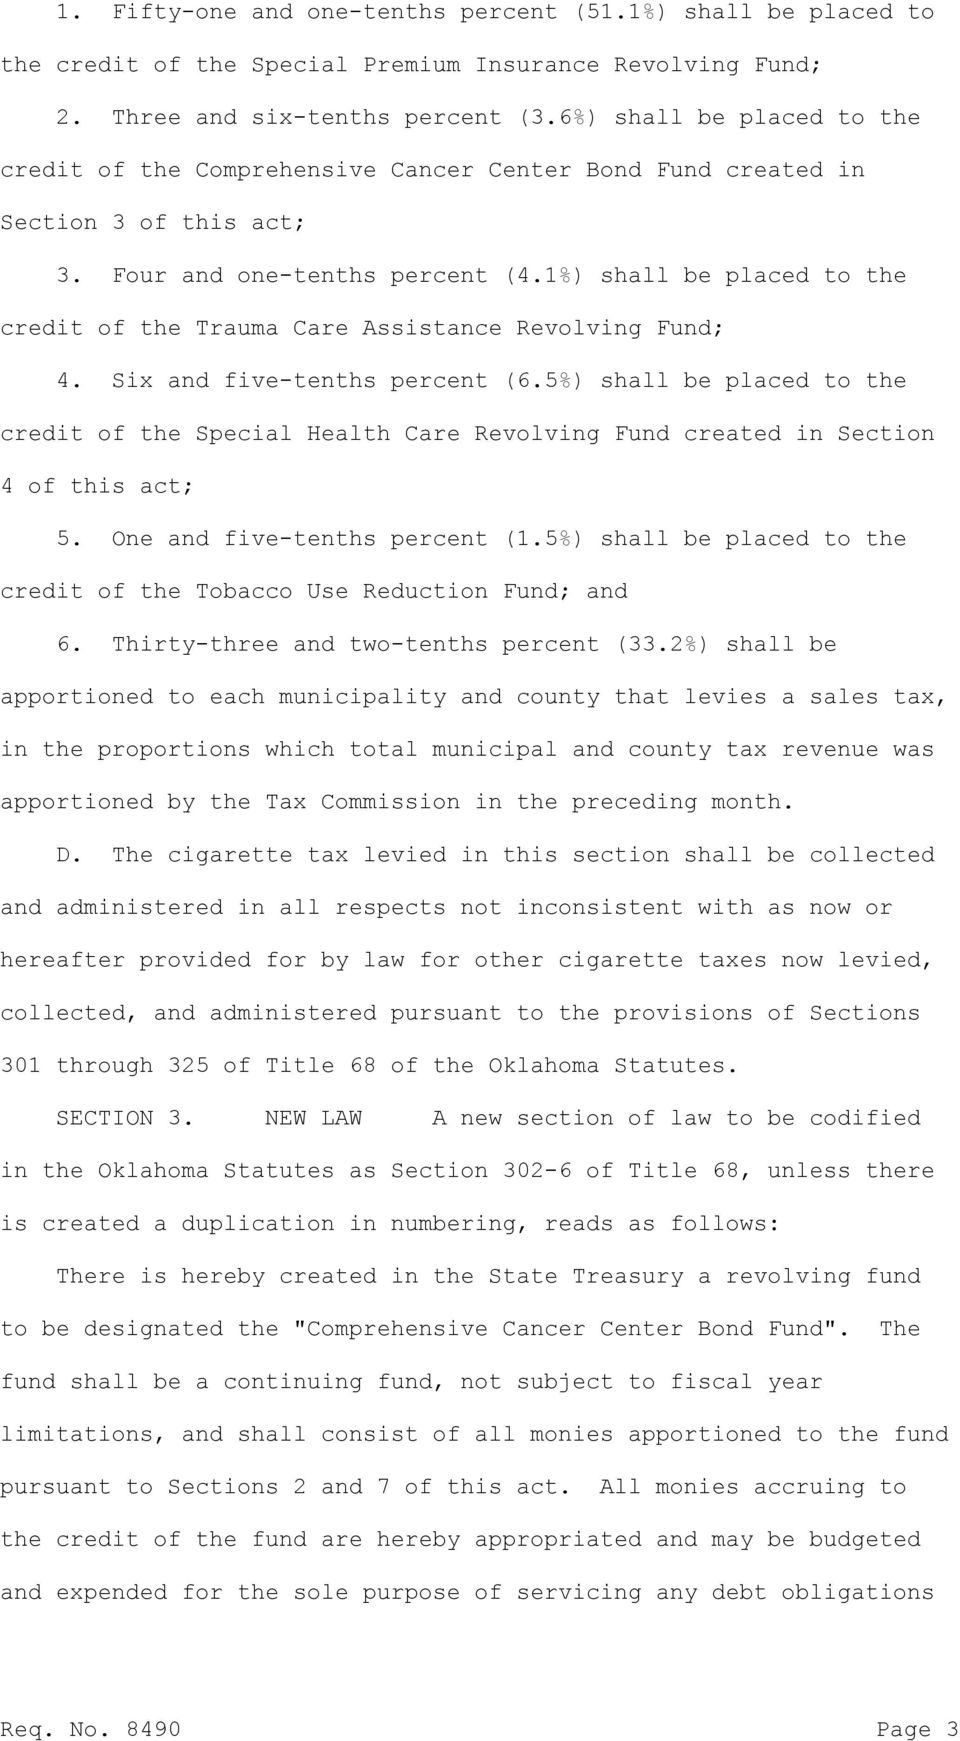 1%) shall be placed to the credit of the Trauma Care Assistance Revolving Fund; 4. Six and five-tenths percent (6.